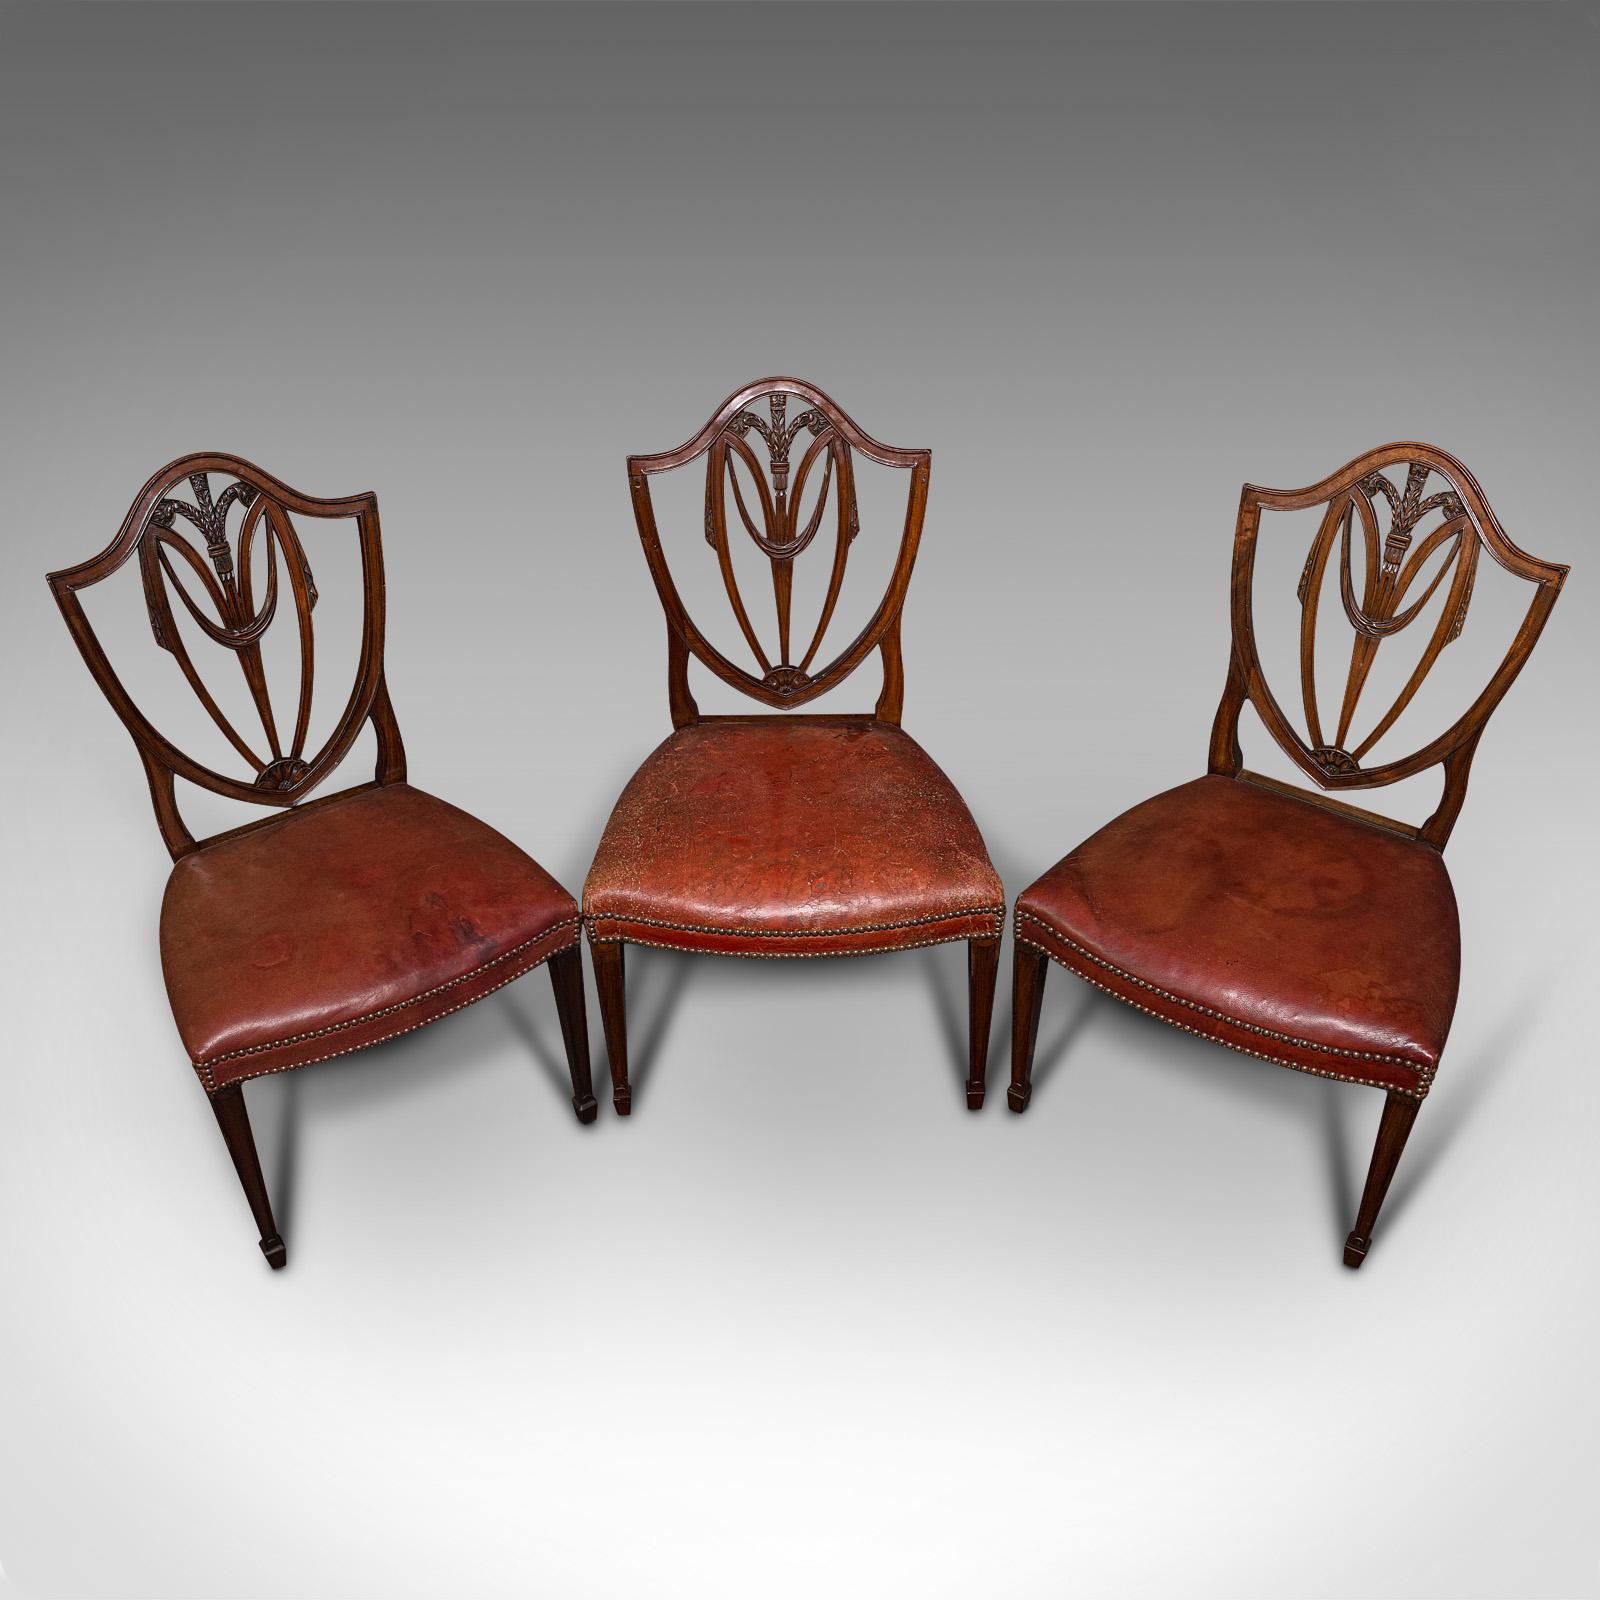 Set of 6, Antique Shield Back Chairs, Dining Seat, After Hepplewhite, Georgian 1